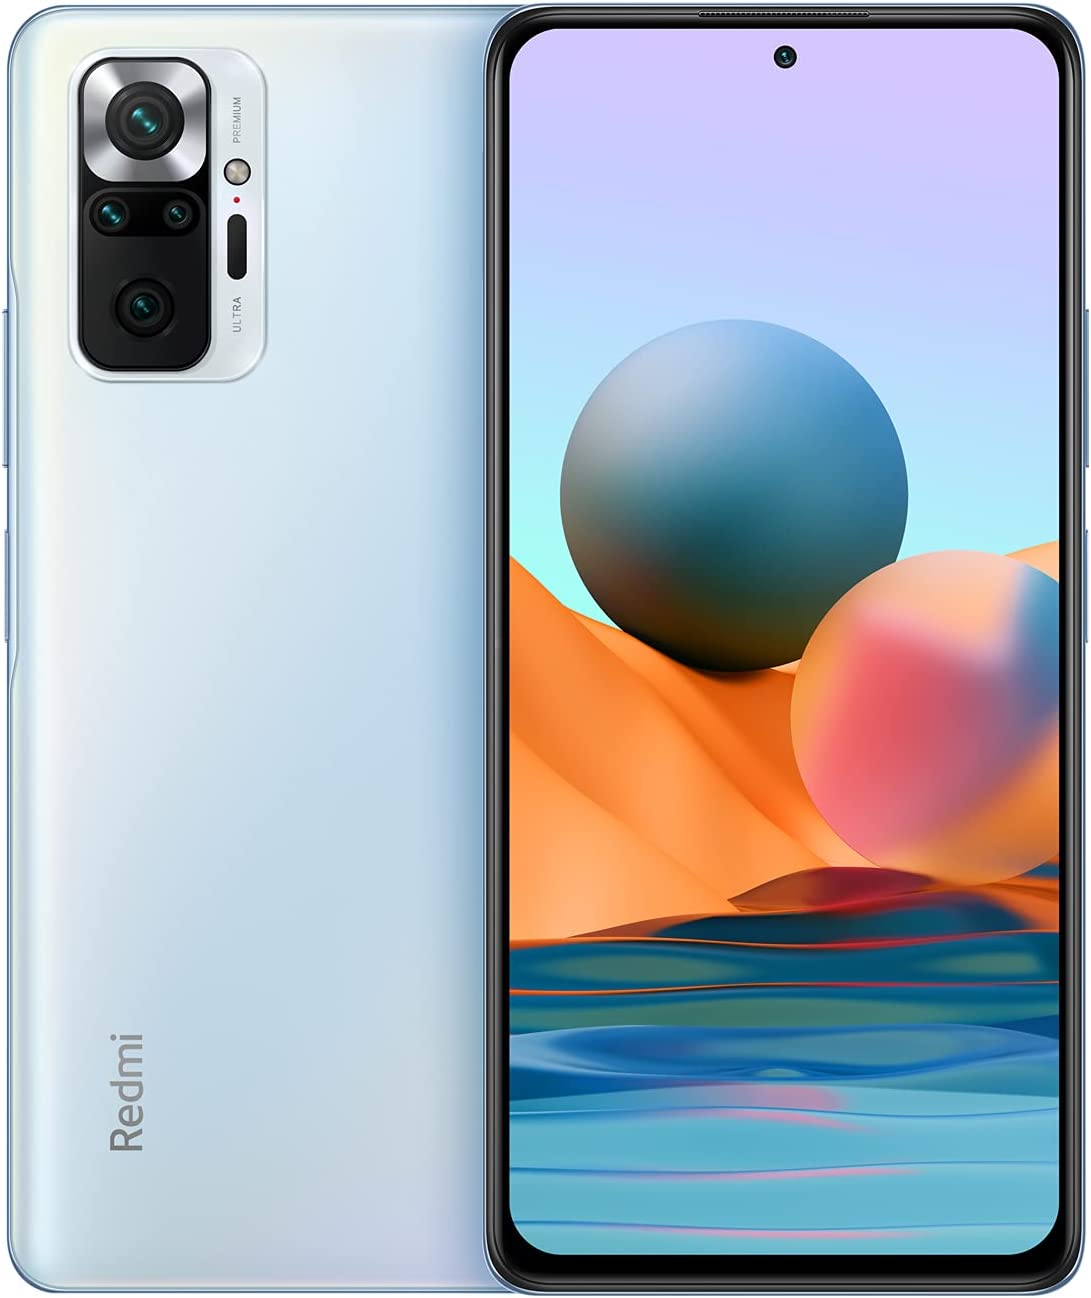 Music and ringing do not work Xiaomi Redmi Note 10 Pro